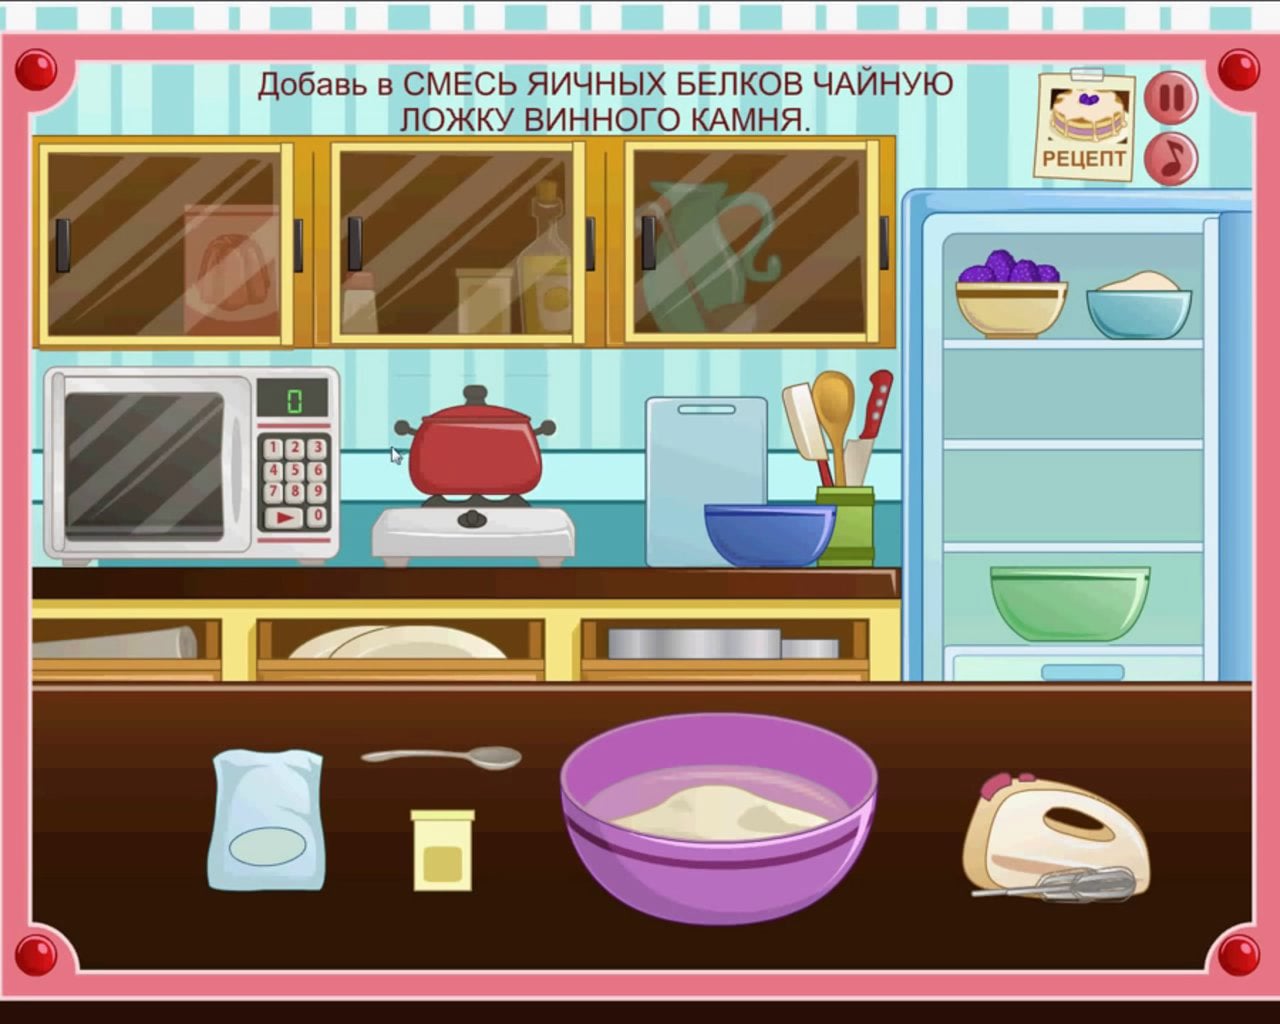 Pancakes Cake Cooking Android Gameplay - YouTube